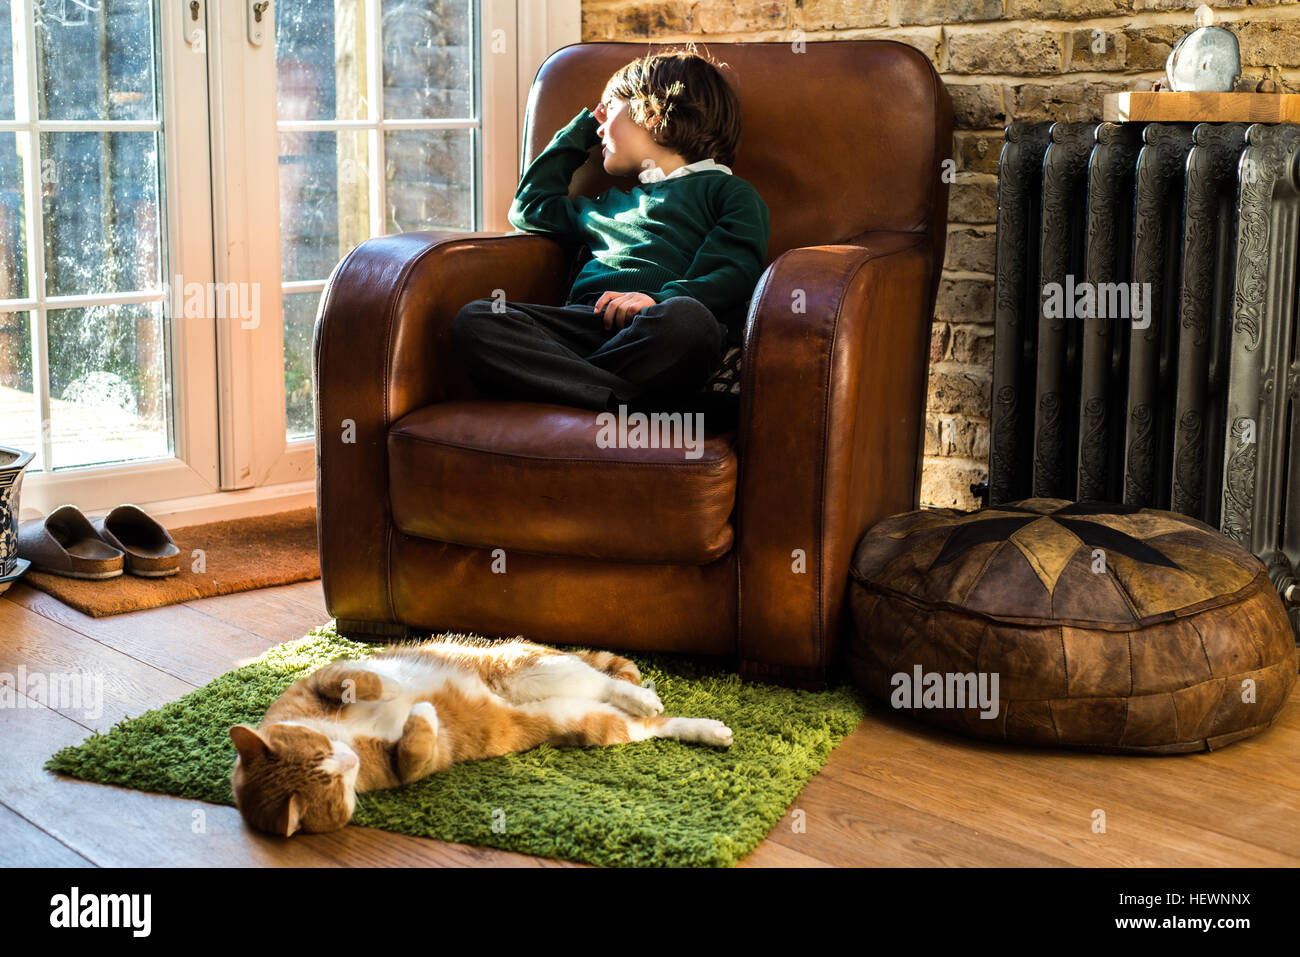 Boy relaxing on arm chair after school Stock Photo